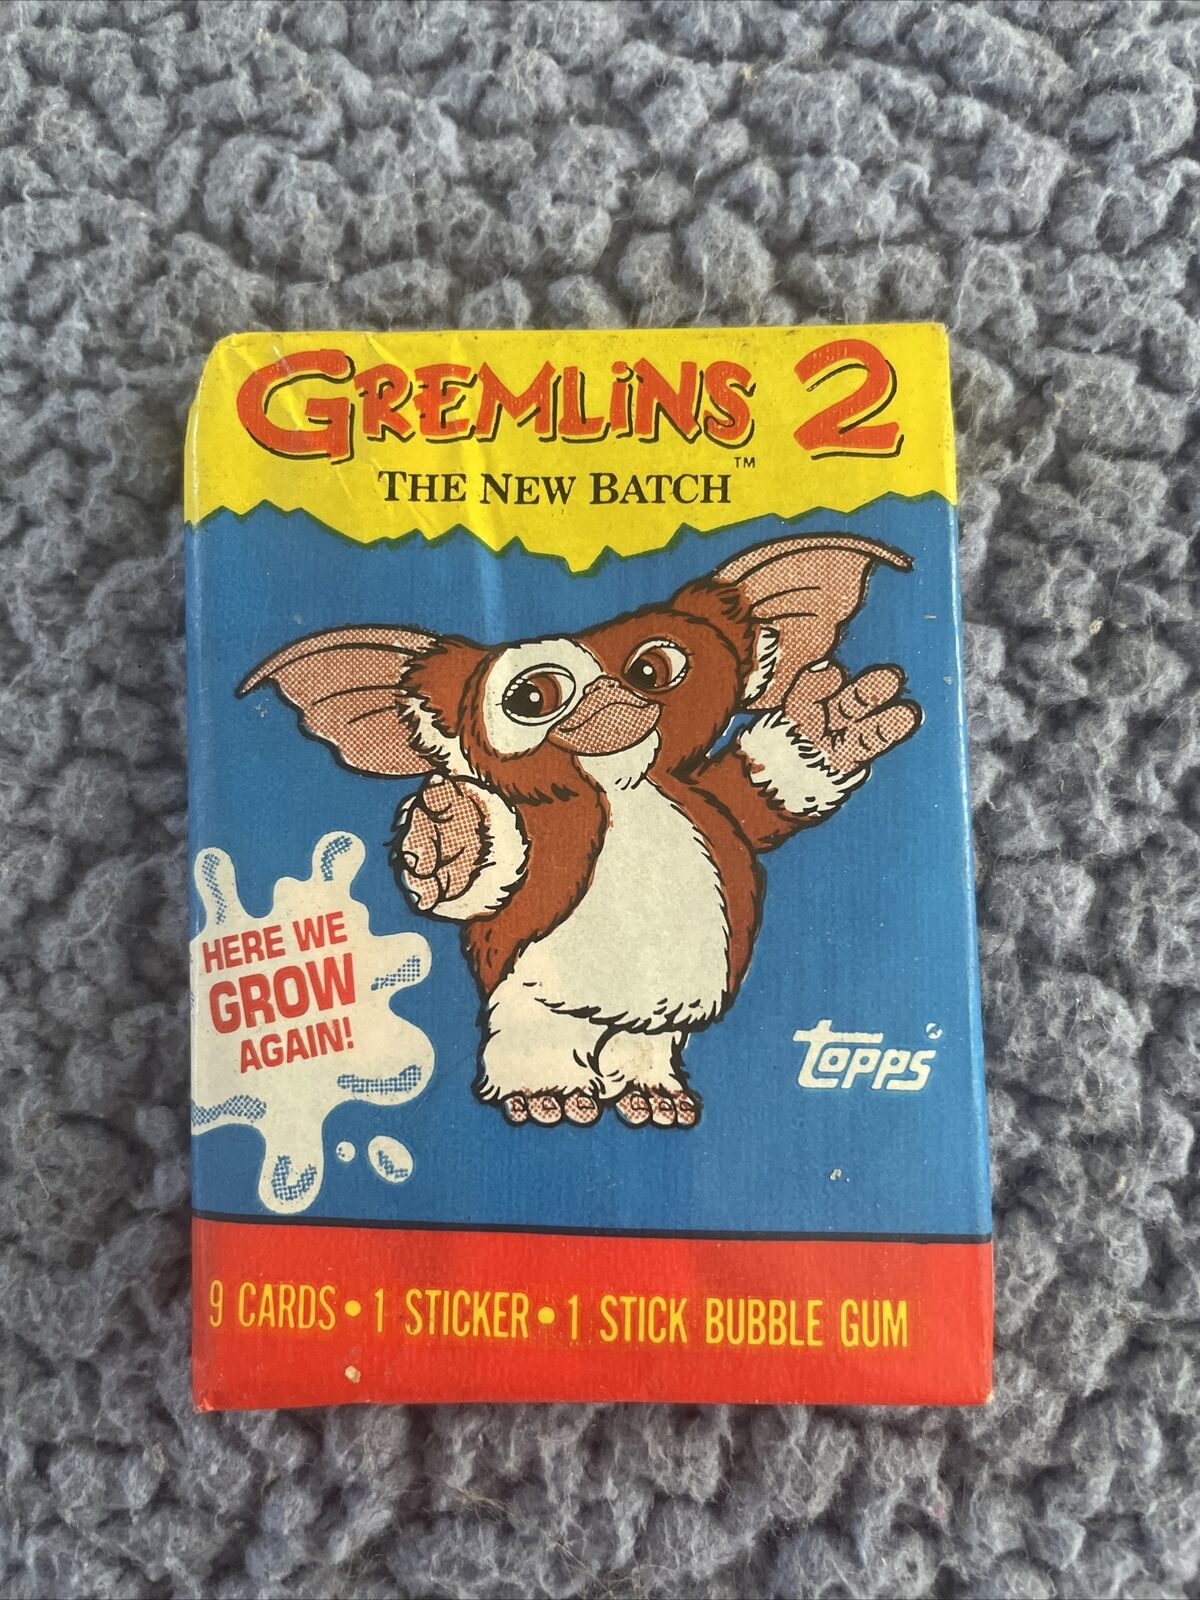 GREMLINS 2 1990 Topps UNOPENED trading card Wax Pack w/gum NEW Vintage